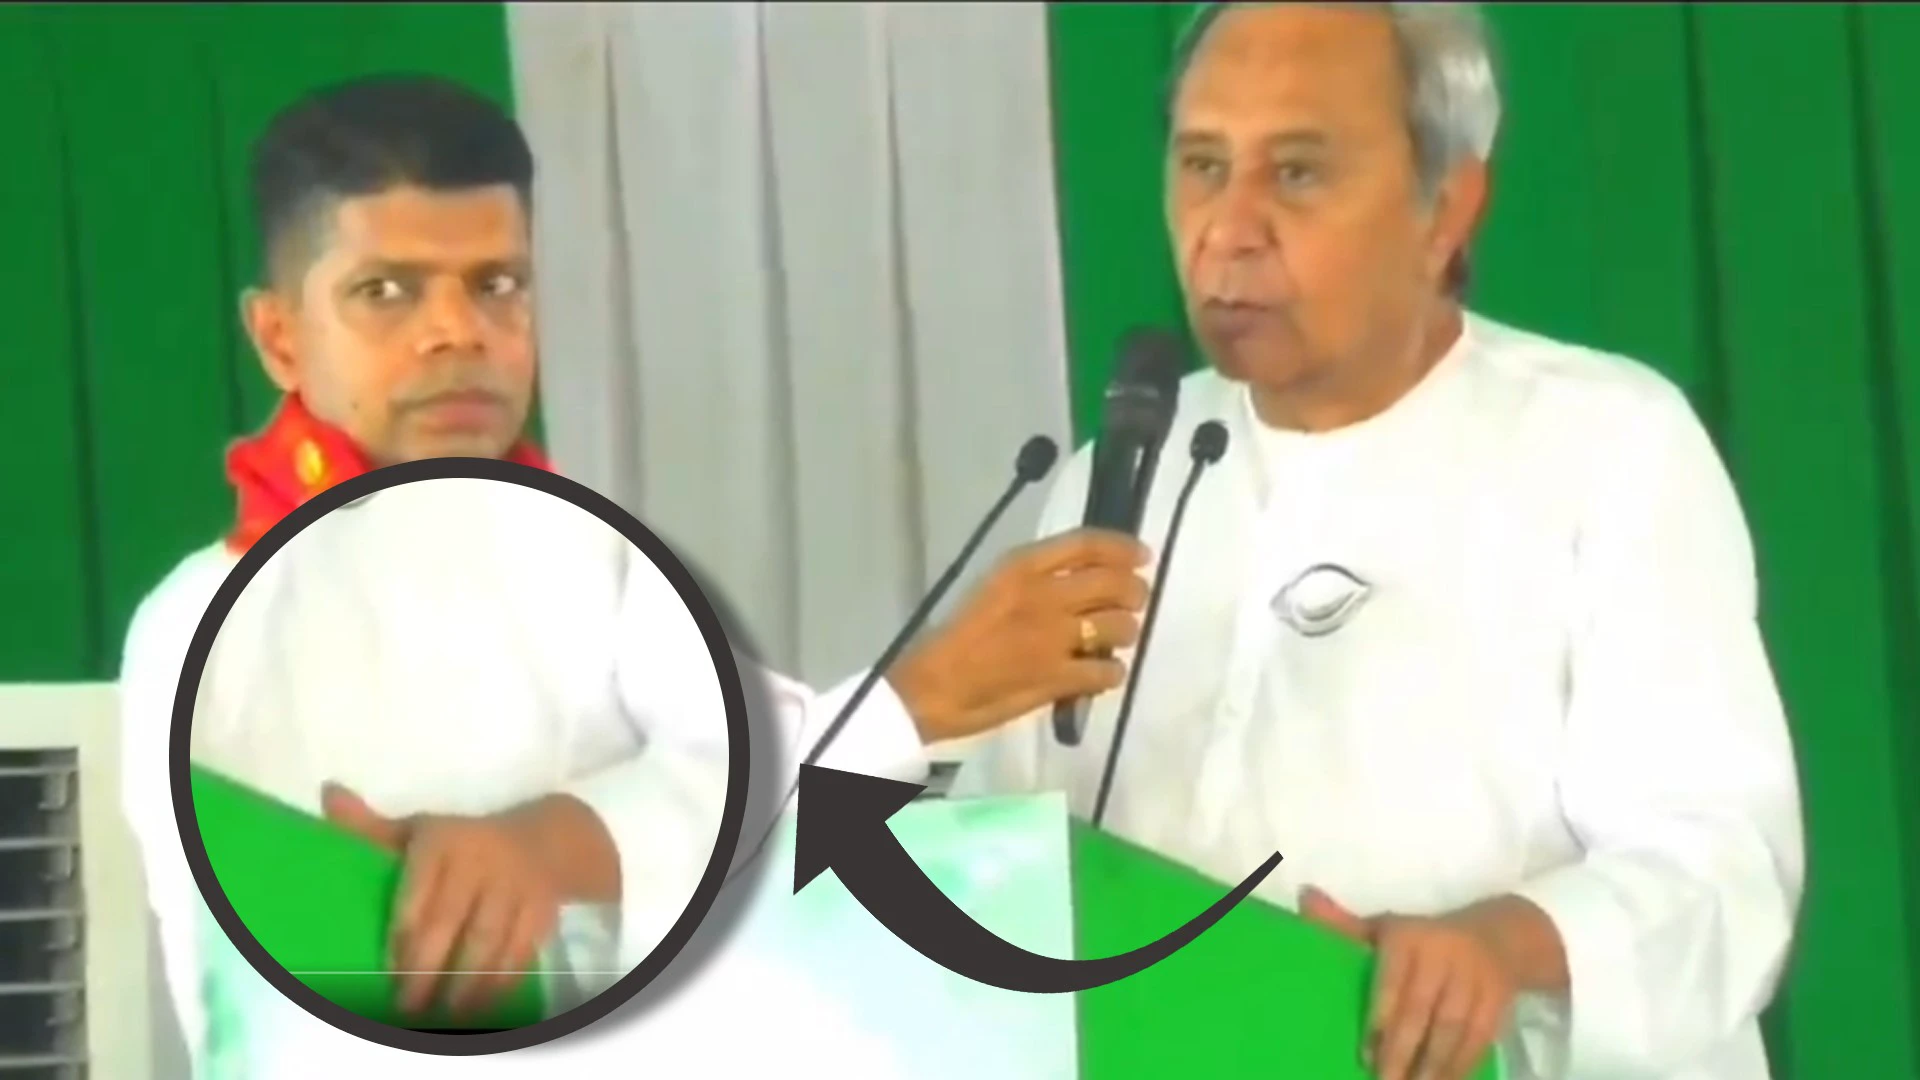 Odisha CM Naveen Patnaik's Hands Seen Trembling During LS Poll Speech, Aide Pandian Comes To His Aid; Video Viral